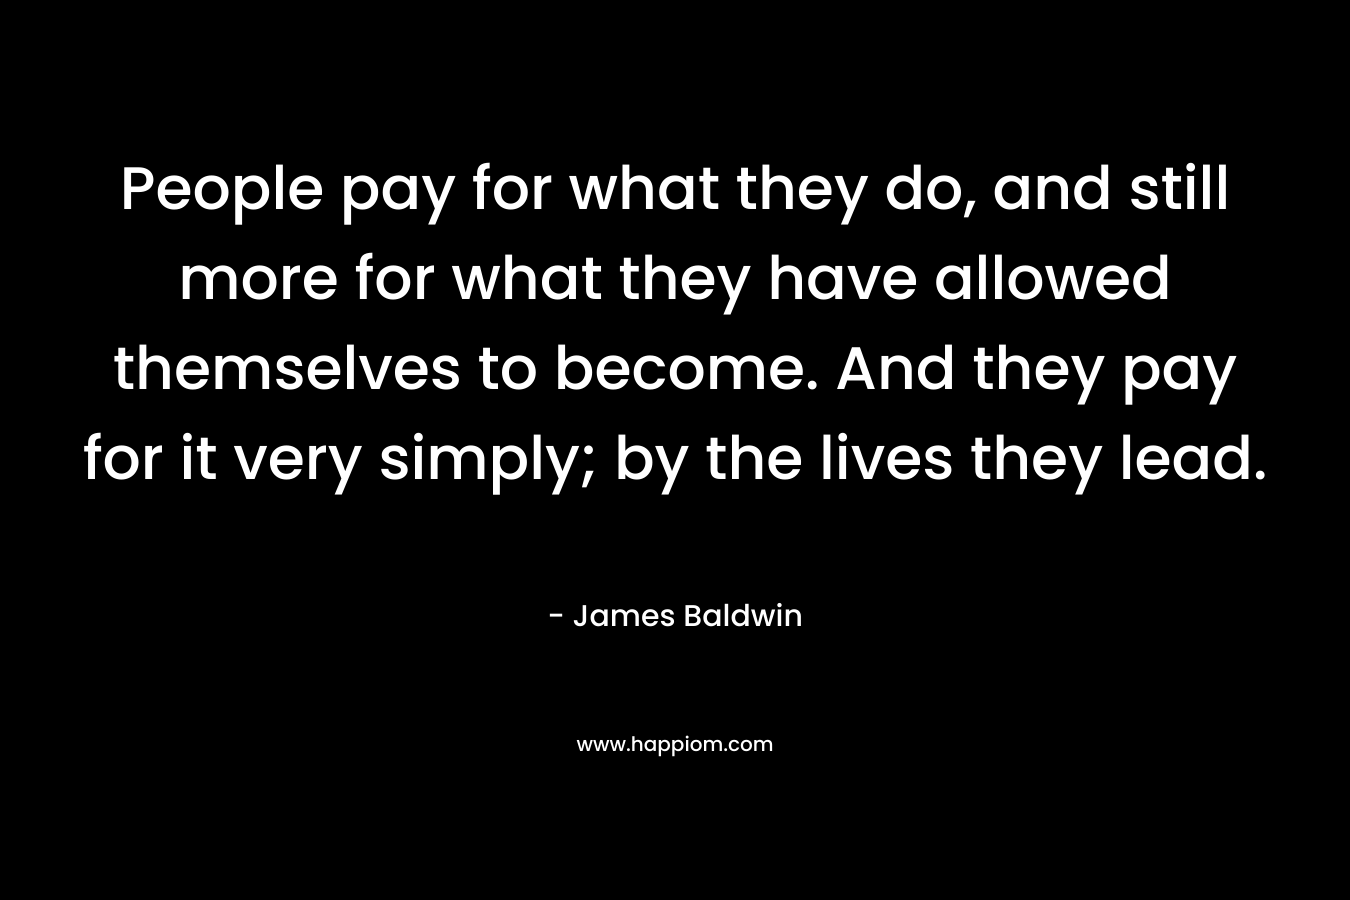 People pay for what they do, and still more for what they have allowed themselves to become. And they pay for it very simply; by the lives they lead.